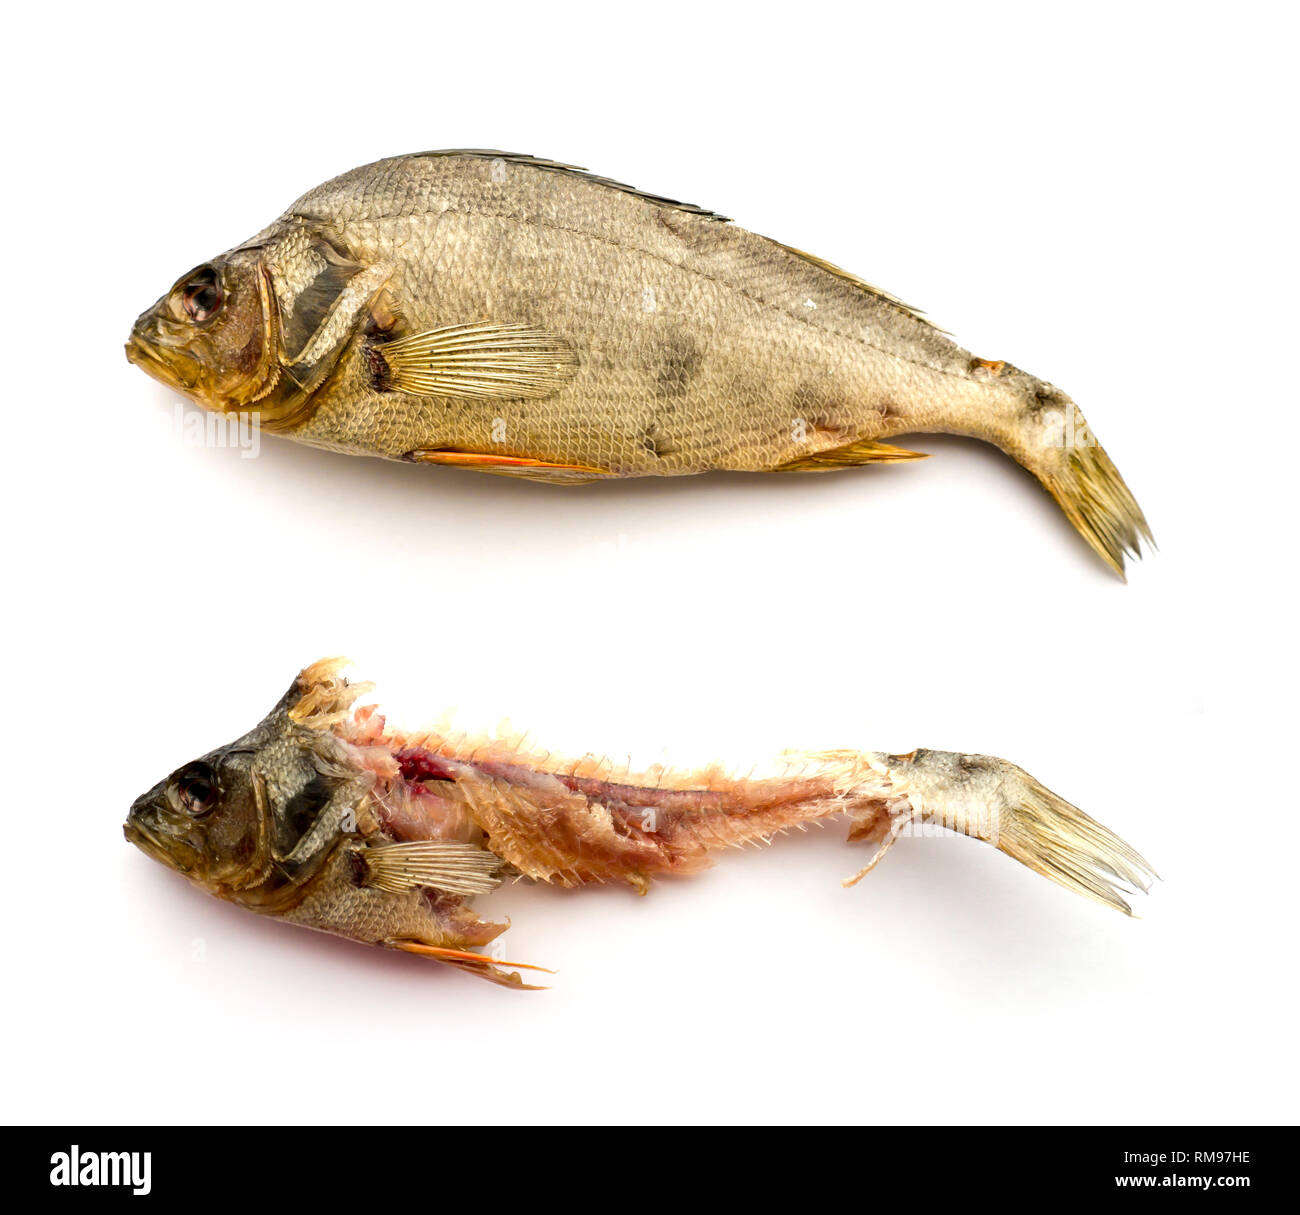 The Dried Fish on a white background. Perch before and after. Stock Photo